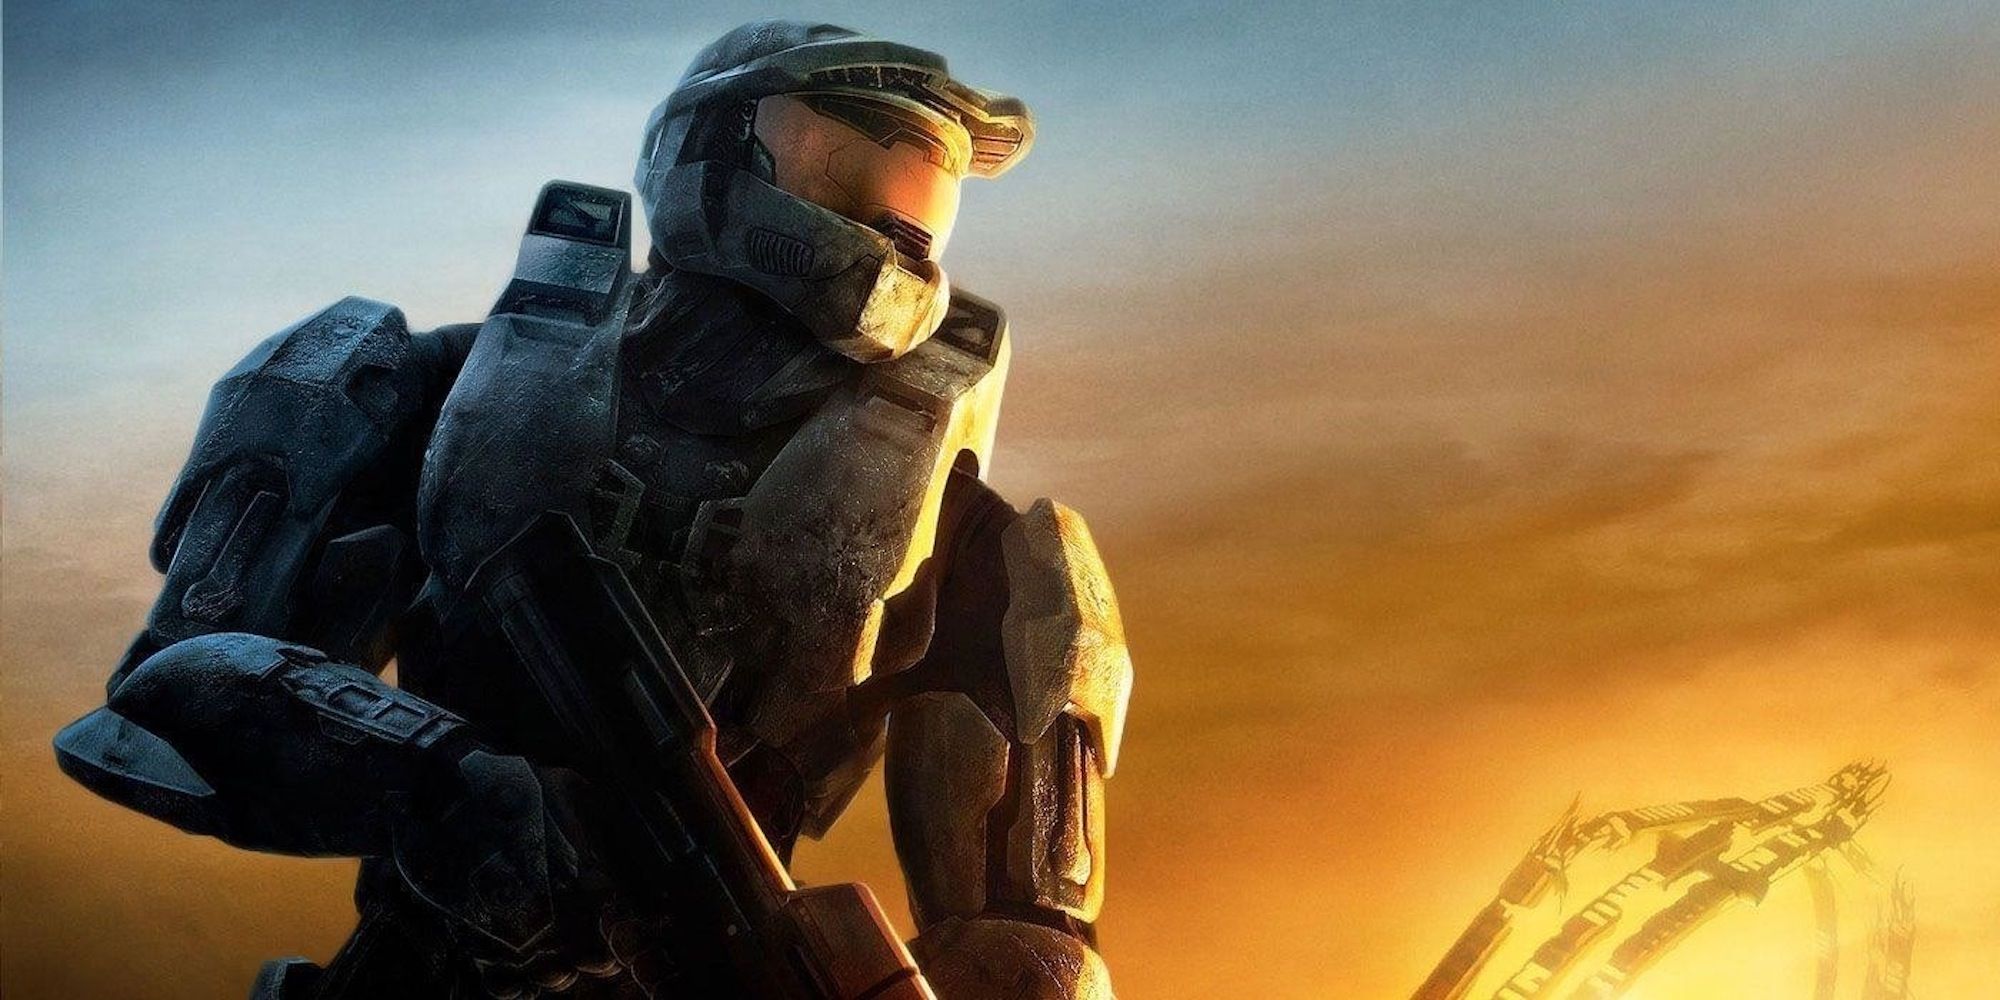 Master Chief from Halo 3